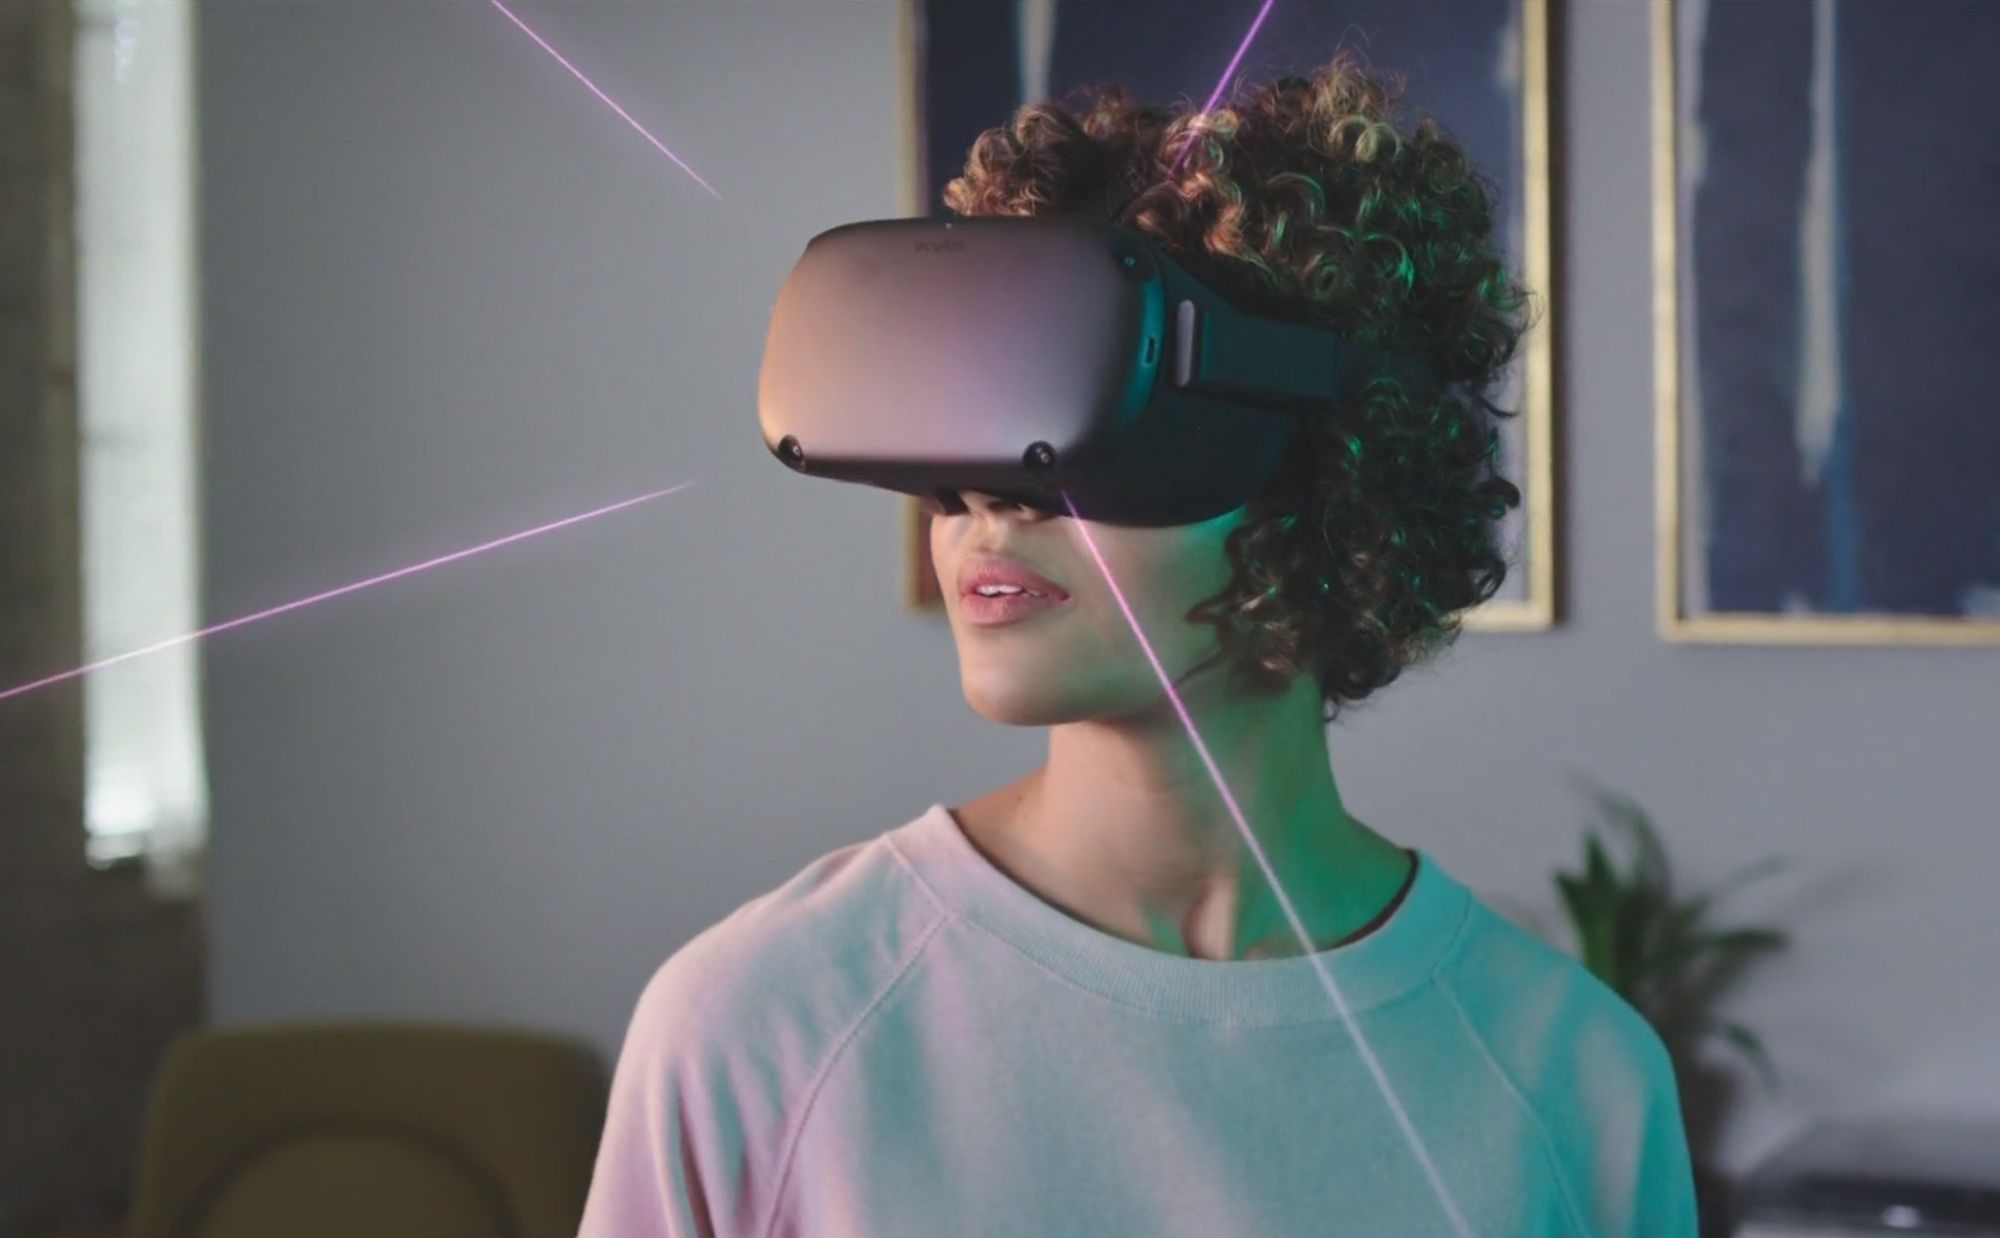 download free ghost giant oculus quest